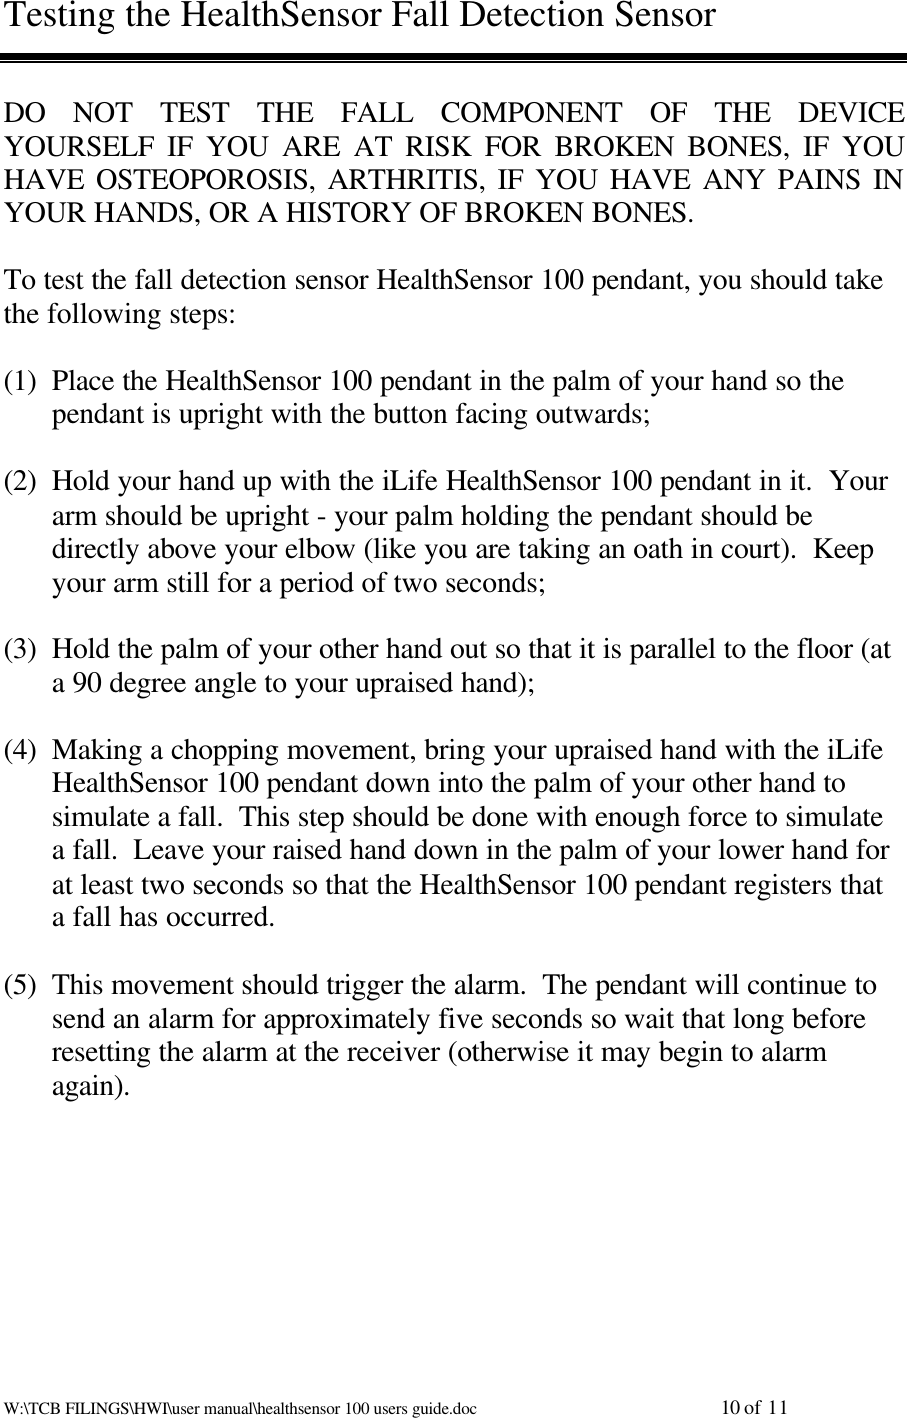 W:\TCB FILINGS\HWI\user manual\healthsensor 100 users guide.doc                                                          10 of 11Testing the HealthSensor Fall Detection SensorDO NOT TEST THE FALL COMPONENT OF THE DEVICEYOURSELF IF YOU ARE AT RISK FOR BROKEN BONES, IF YOUHAVE OSTEOPOROSIS, ARTHRITIS, IF YOU HAVE ANY PAINS INYOUR HANDS, OR A HISTORY OF BROKEN BONES.To test the fall detection sensor HealthSensor 100 pendant, you should takethe following steps:(1) Place the HealthSensor 100 pendant in the palm of your hand so thependant is upright with the button facing outwards;(2) Hold your hand up with the iLife HealthSensor 100 pendant in it.  Yourarm should be upright - your palm holding the pendant should bedirectly above your elbow (like you are taking an oath in court).  Keepyour arm still for a period of two seconds;(3) Hold the palm of your other hand out so that it is parallel to the floor (ata 90 degree angle to your upraised hand);(4) Making a chopping movement, bring your upraised hand with the iLifeHealthSensor 100 pendant down into the palm of your other hand tosimulate a fall.  This step should be done with enough force to simulatea fall.  Leave your raised hand down in the palm of your lower hand forat least two seconds so that the HealthSensor 100 pendant registers thata fall has occurred.(5) This movement should trigger the alarm.  The pendant will continue tosend an alarm for approximately five seconds so wait that long beforeresetting the alarm at the receiver (otherwise it may begin to alarmagain).